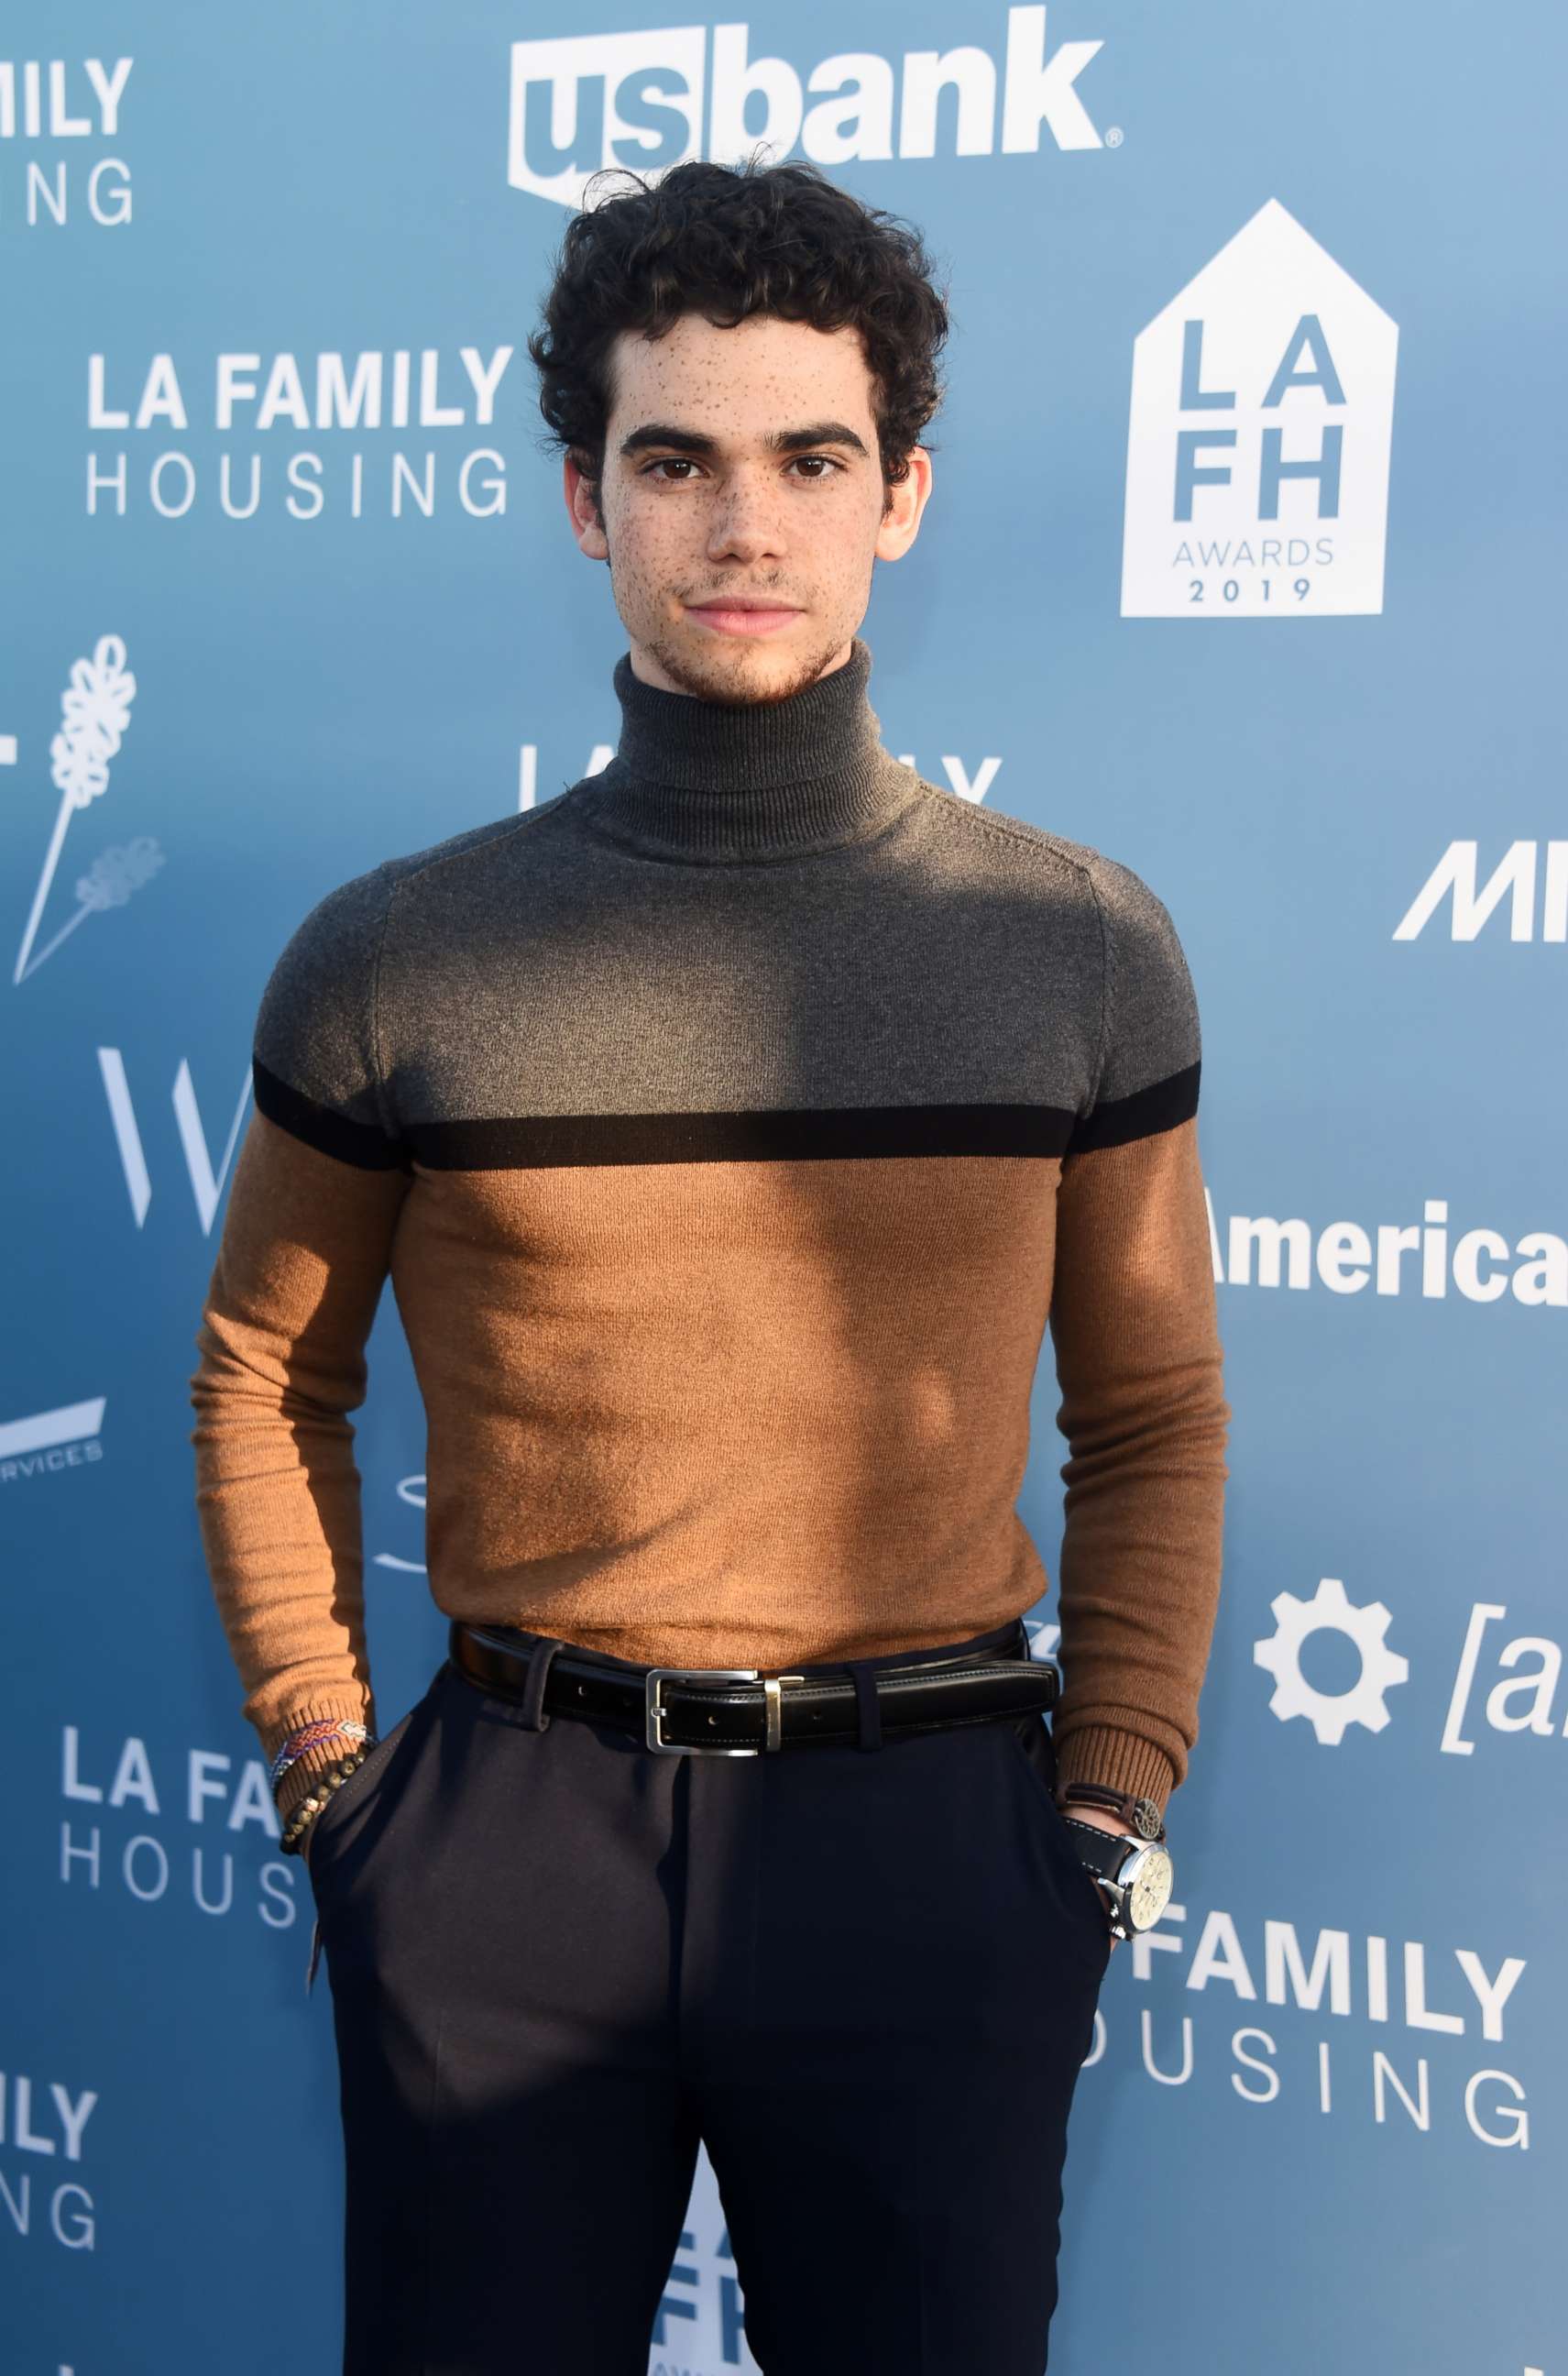 PHOTO: Cameron Boyce attends an event on April 25, 2019 in West Hollywood, Calif.